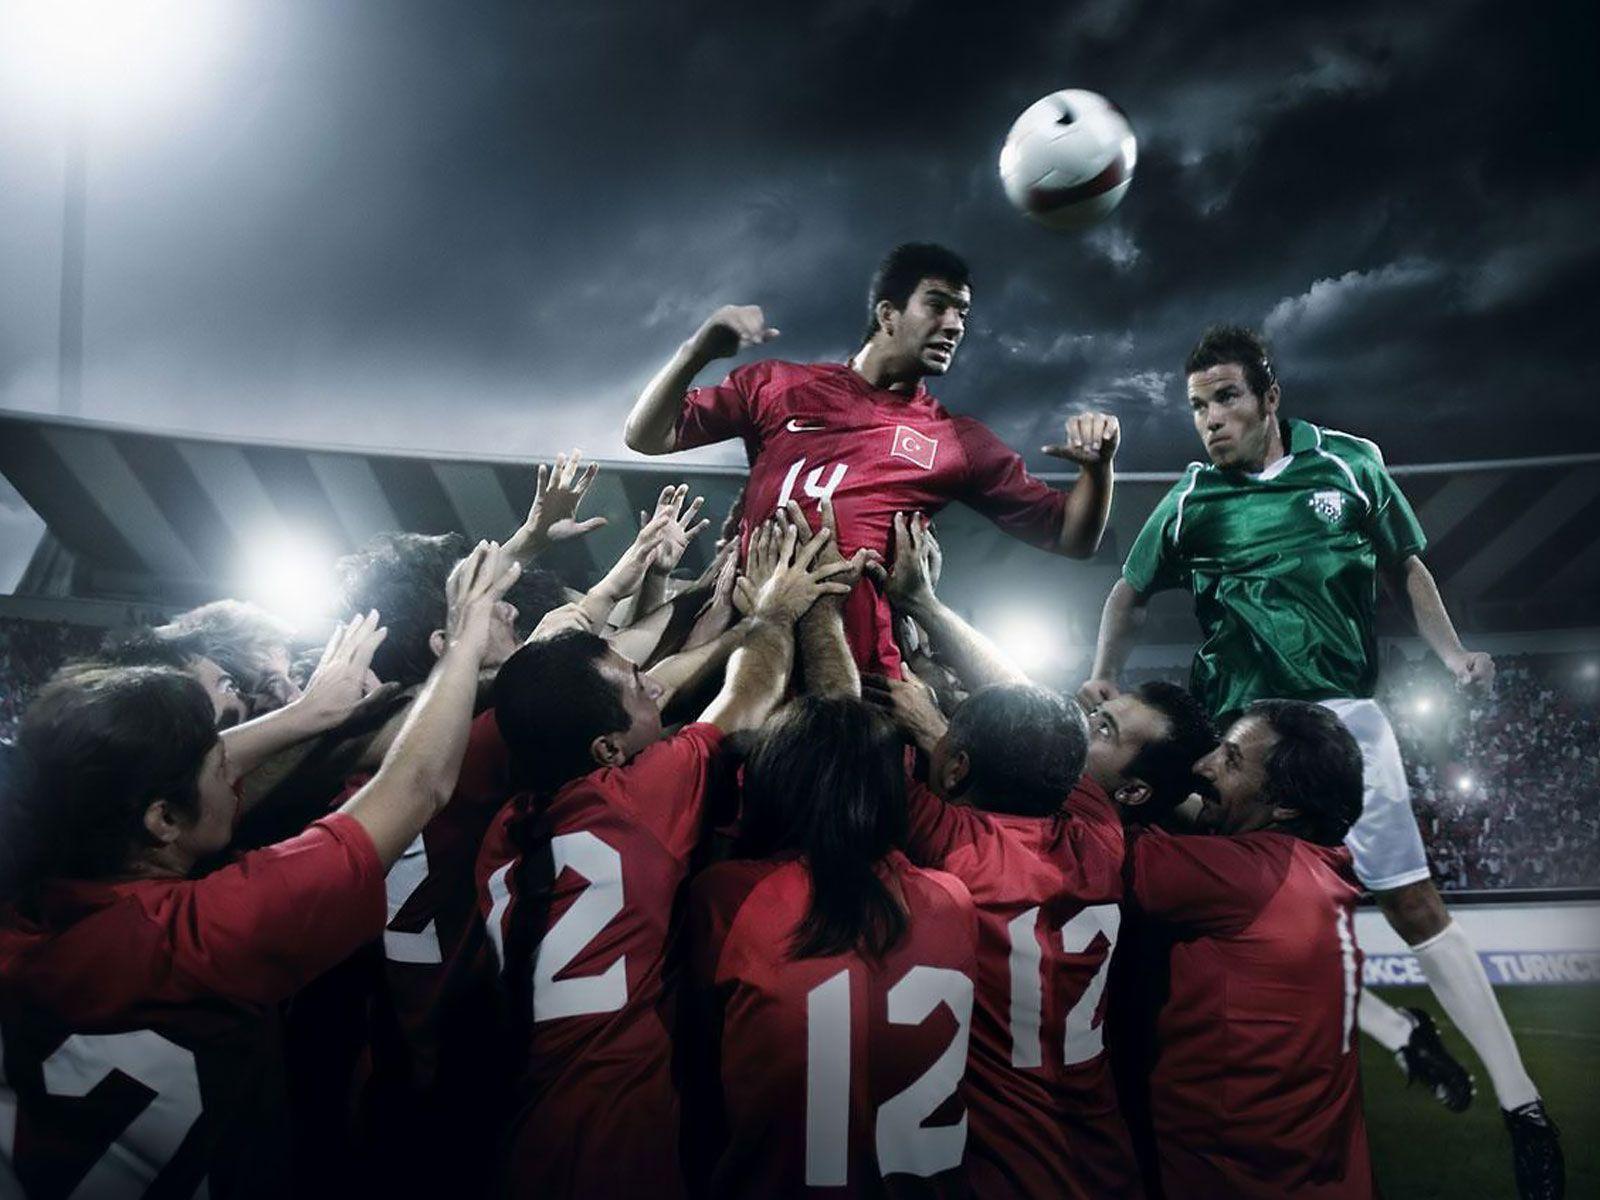 Desktop Wallpapers · Gallery · Sports · FIFA World Cup